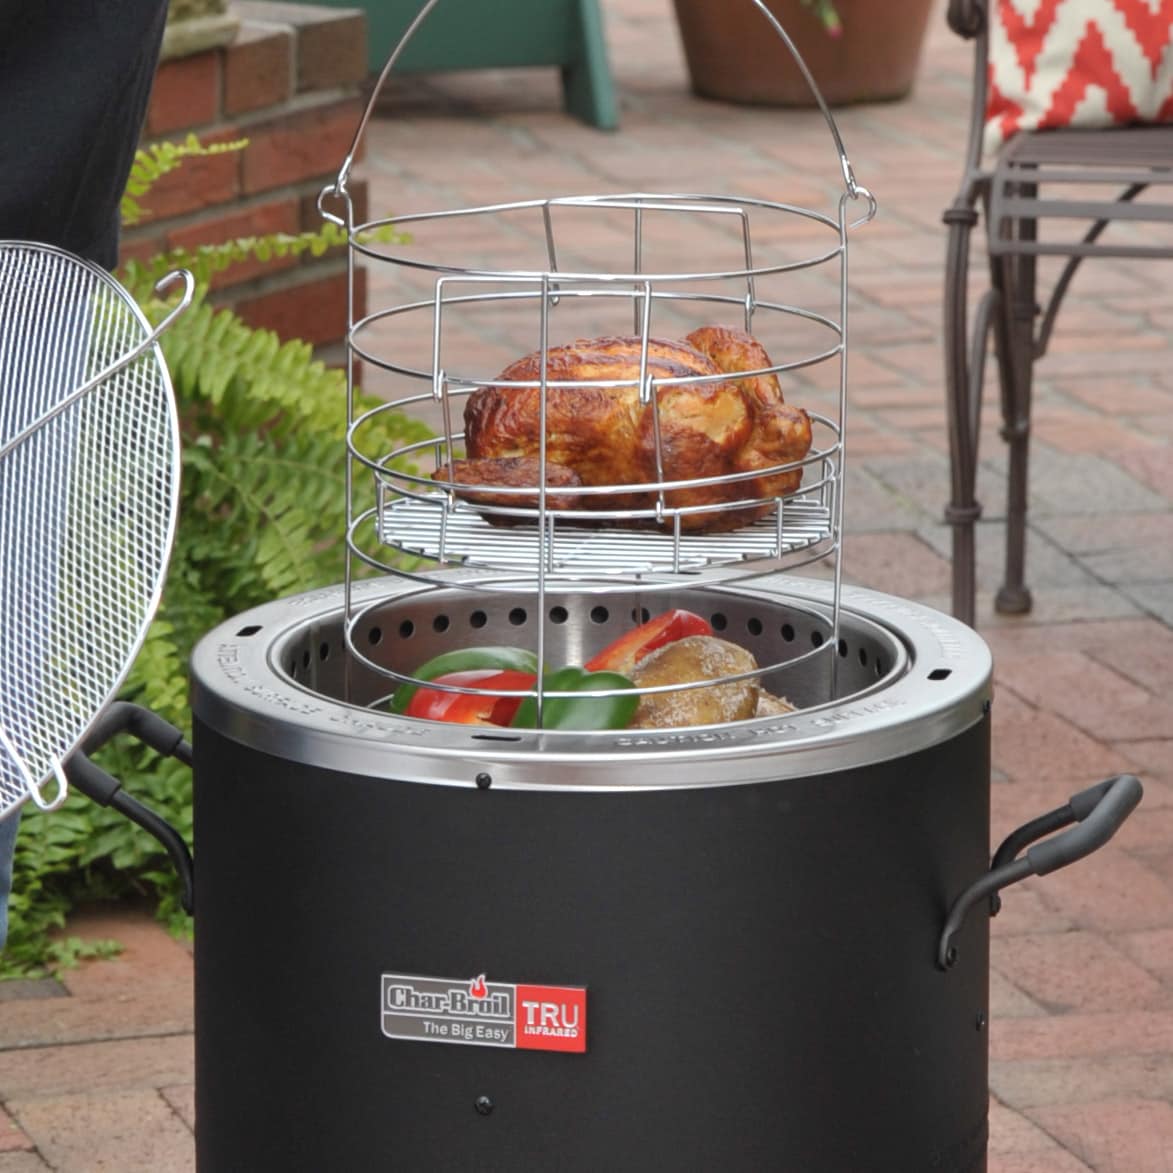 Turkey Fryer In The Accessories, Char Broil Big Easy Bunk Bed Basket